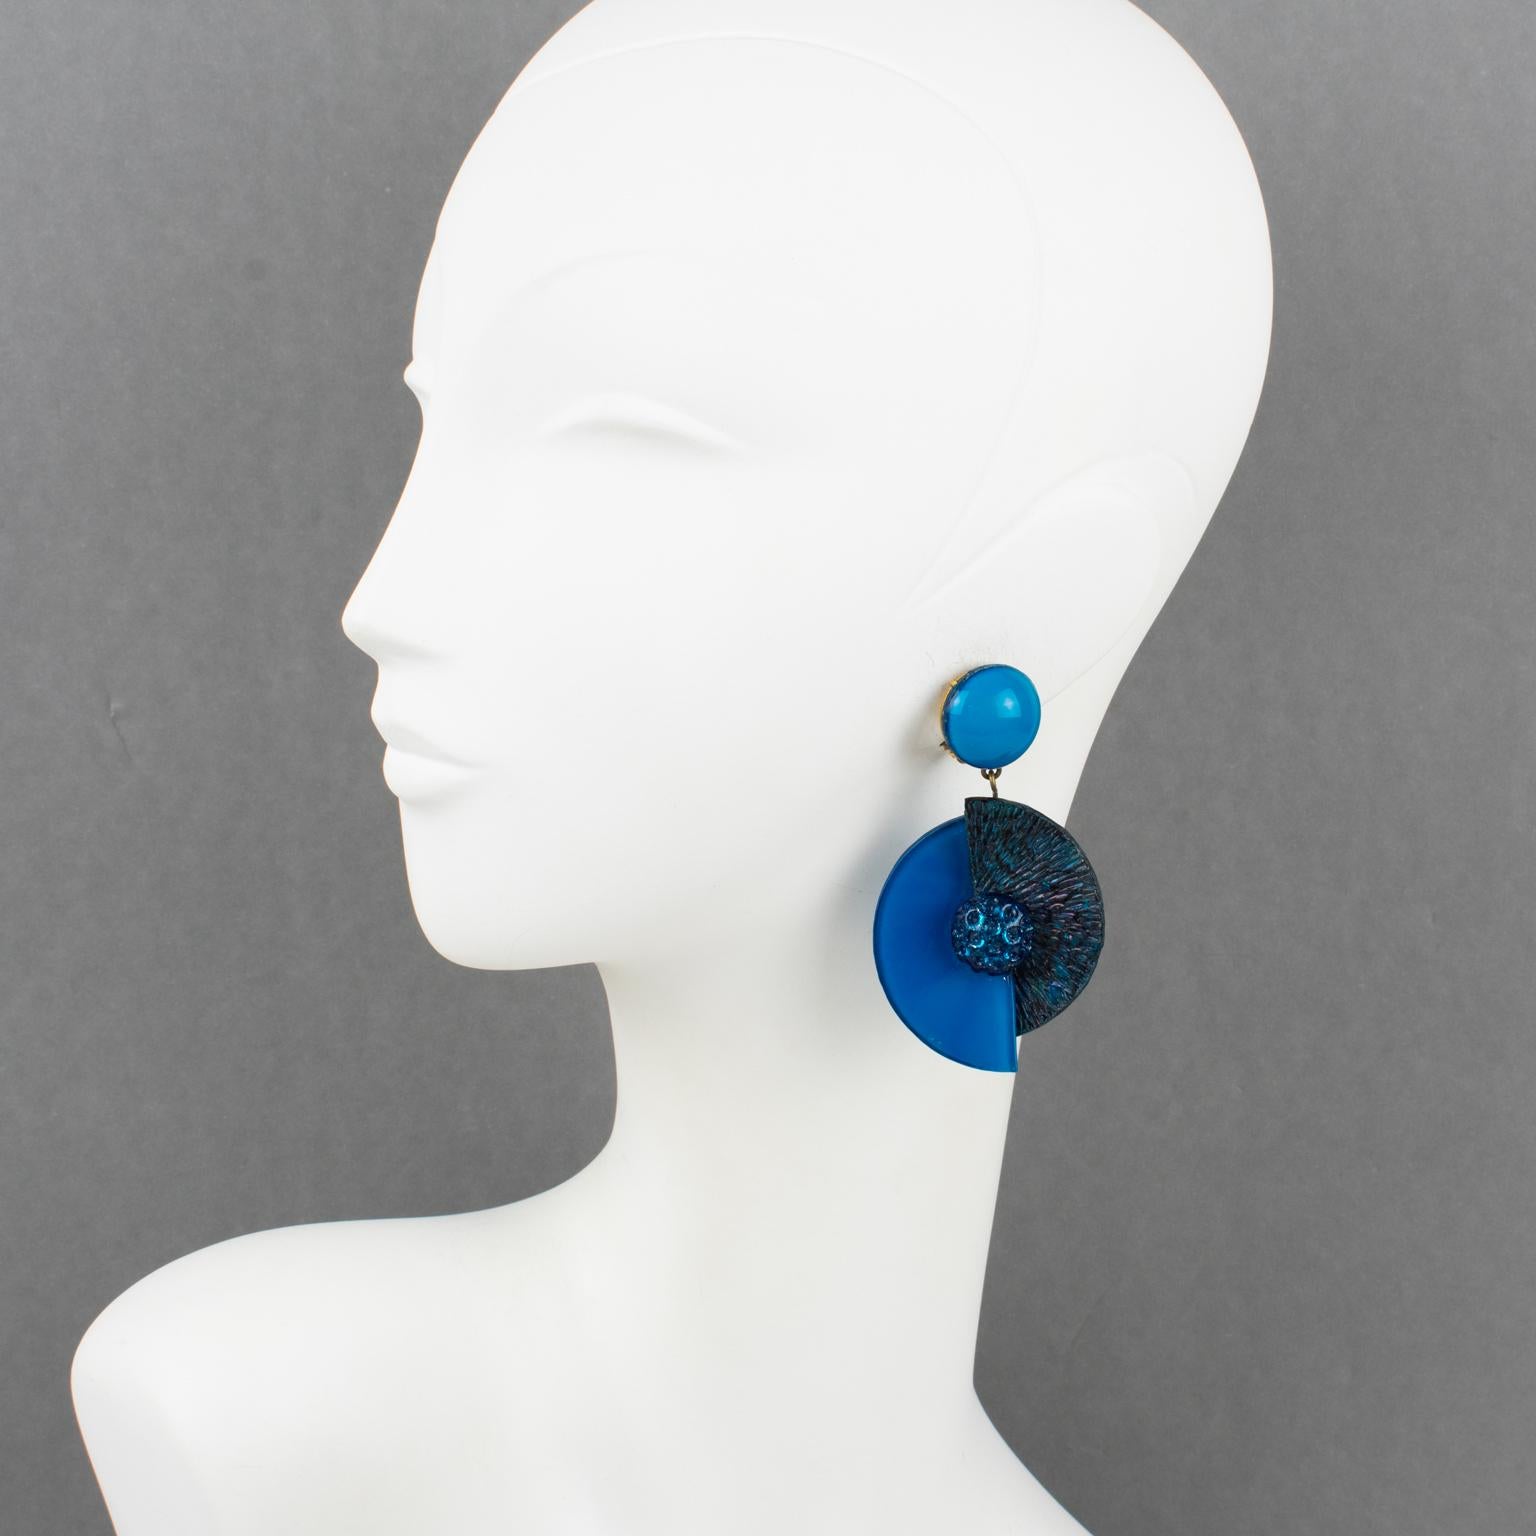 Cilea Paris designed these lovely dimensional dangling clip-on earrings. These Japanese-inspired hand-made artisanal resin earrings feature assorted geometric fan forms with textured patterns to build together and form a powerful statement piece.